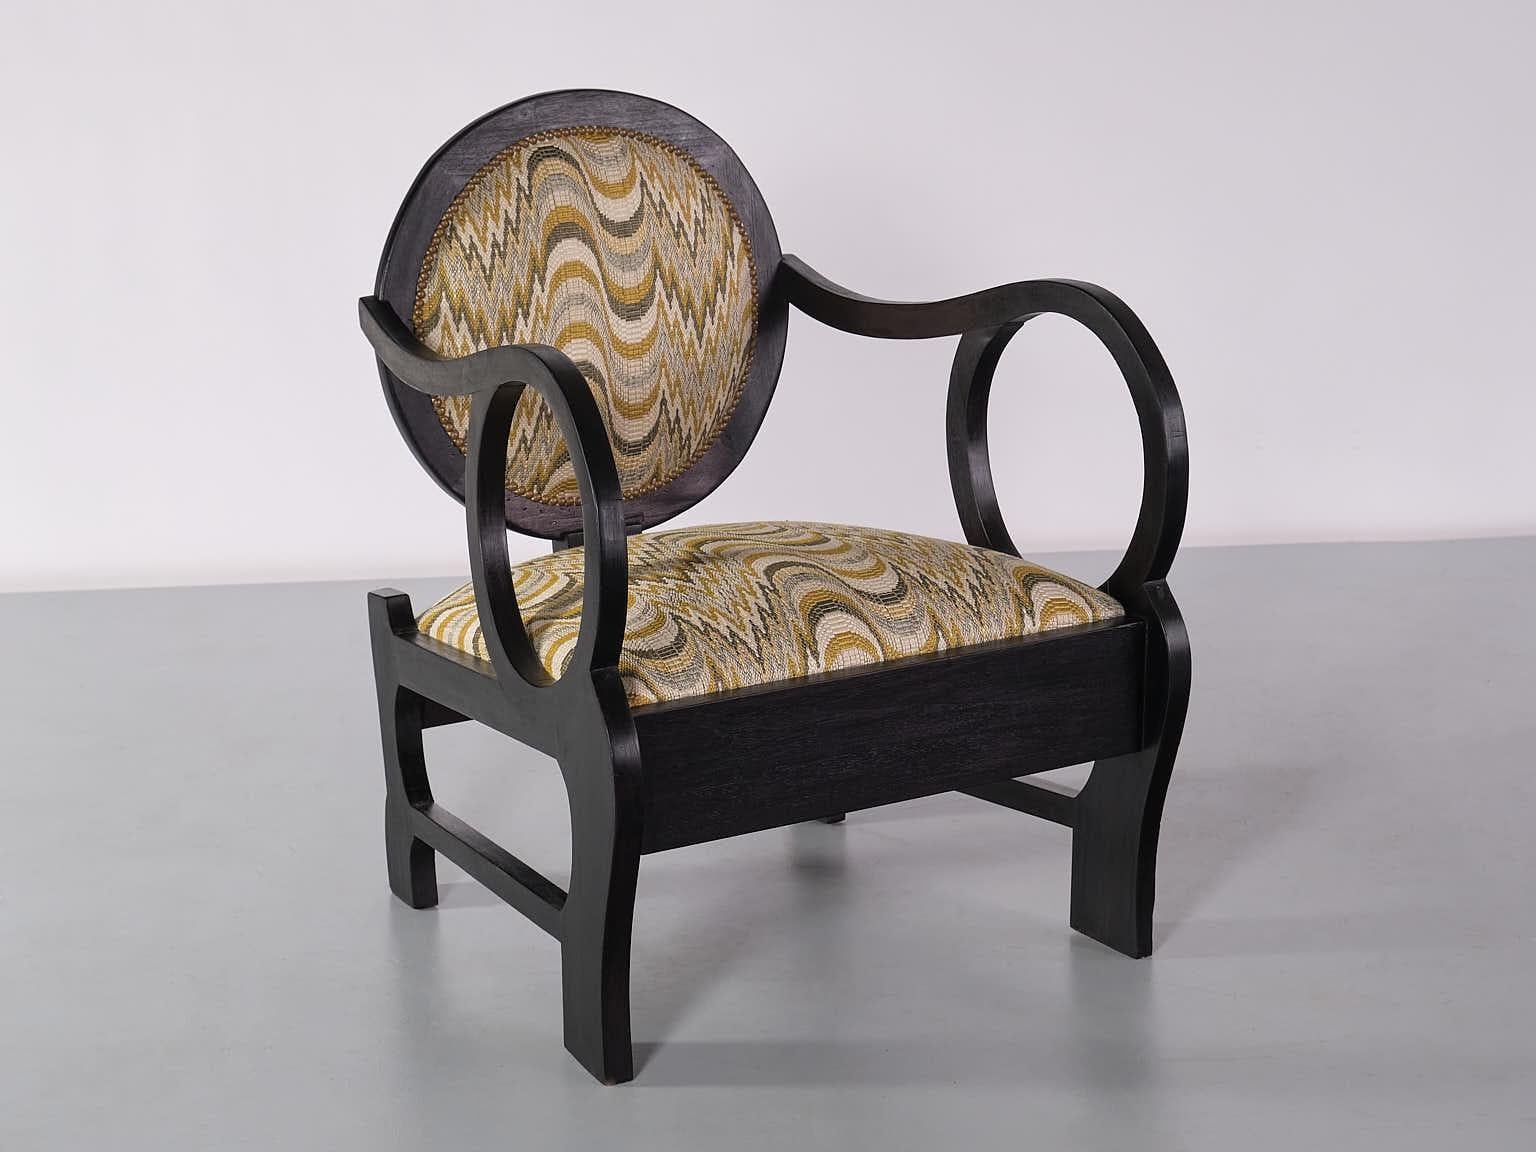 Pair of Lajos Kozma Attributed Armchairs in Oak and Dedar Jacquard, Late 1940s For Sale 7